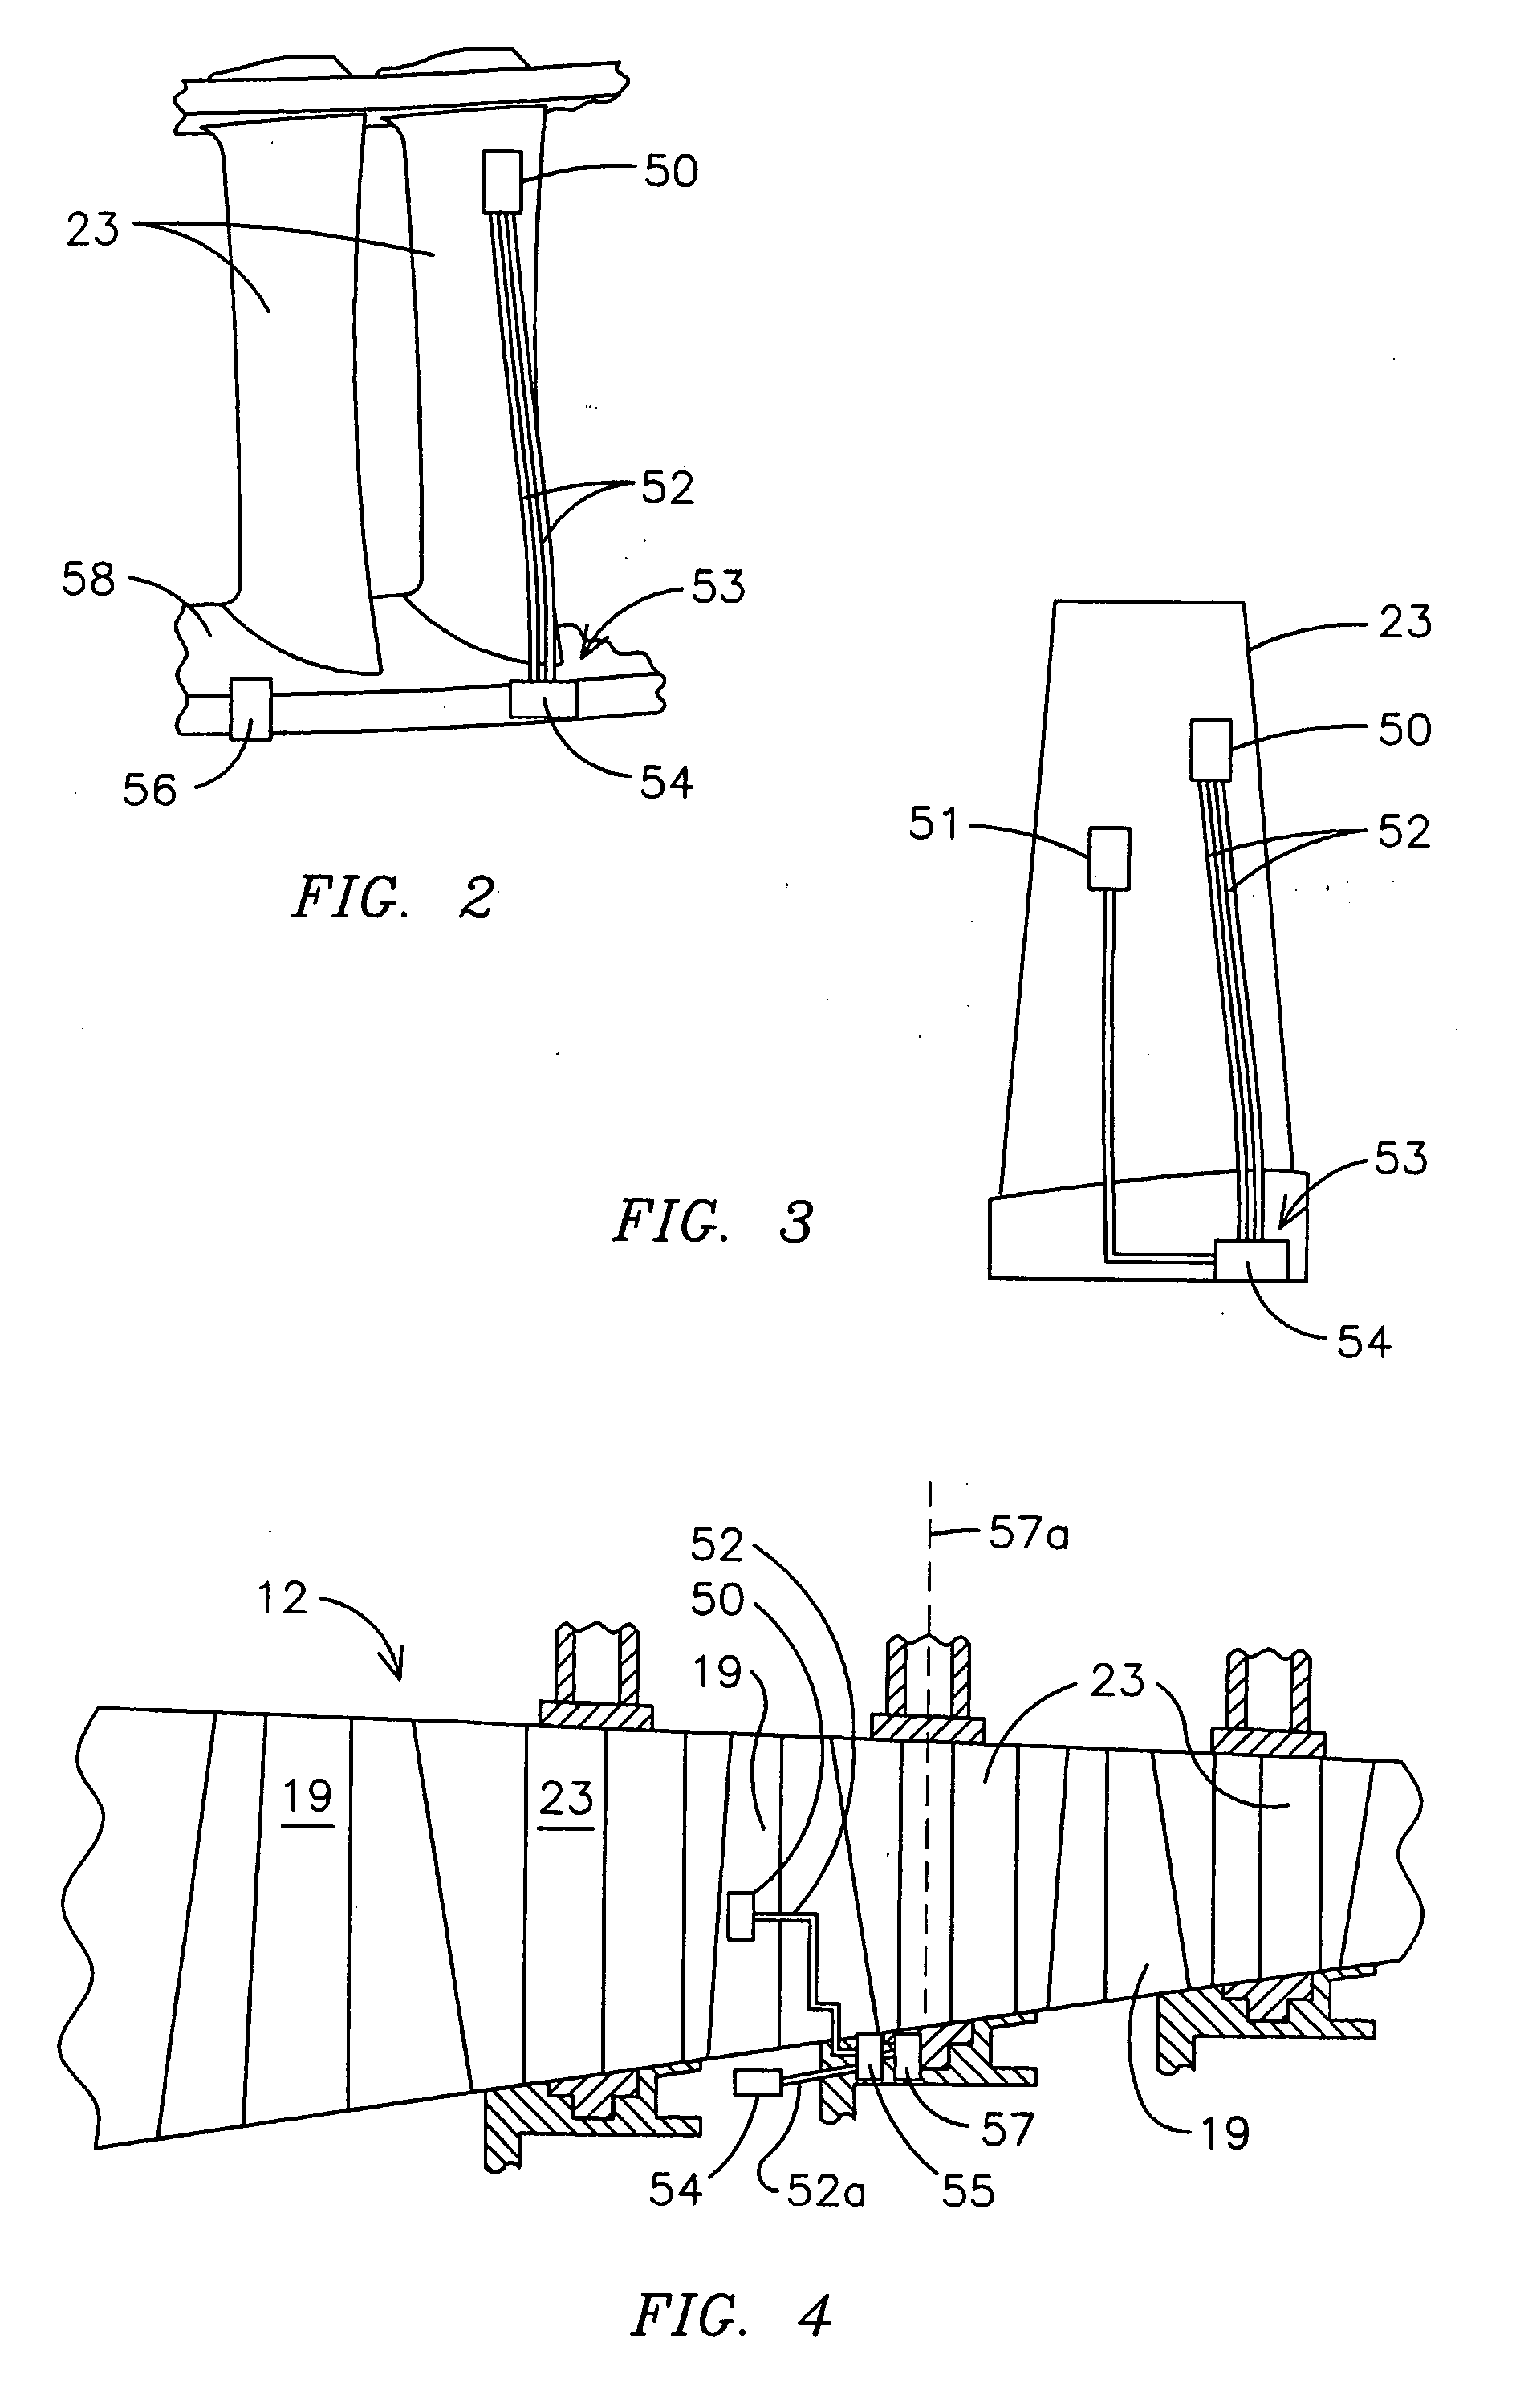 Apparatus and method of monitoring operating parameters of a gas turbine